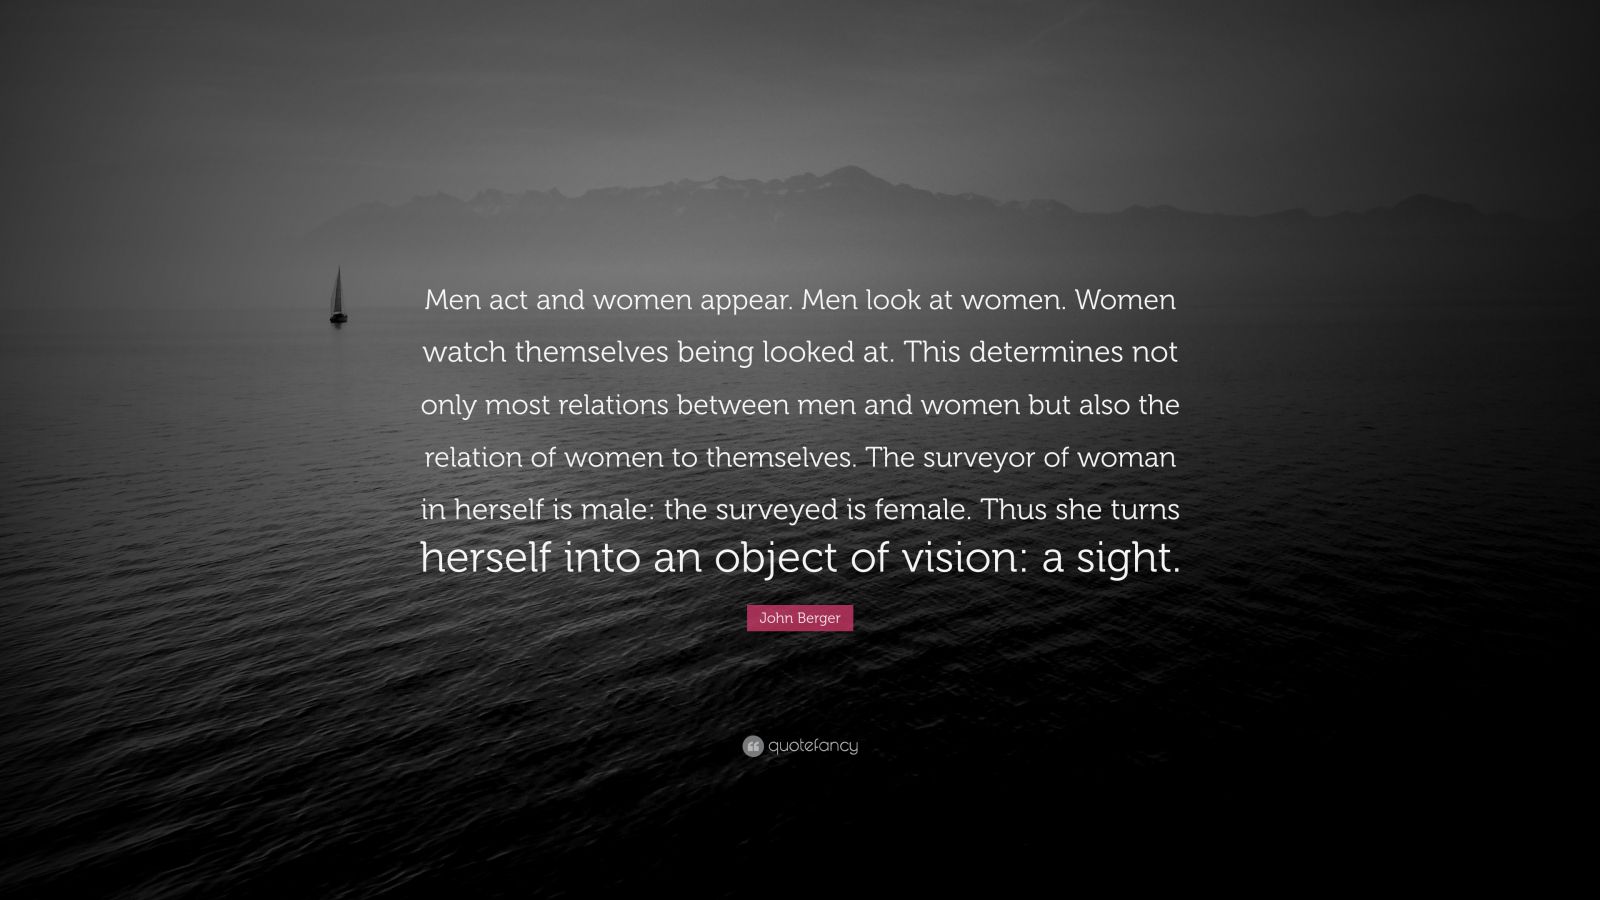 It turns out that both men and women are looking at the same place